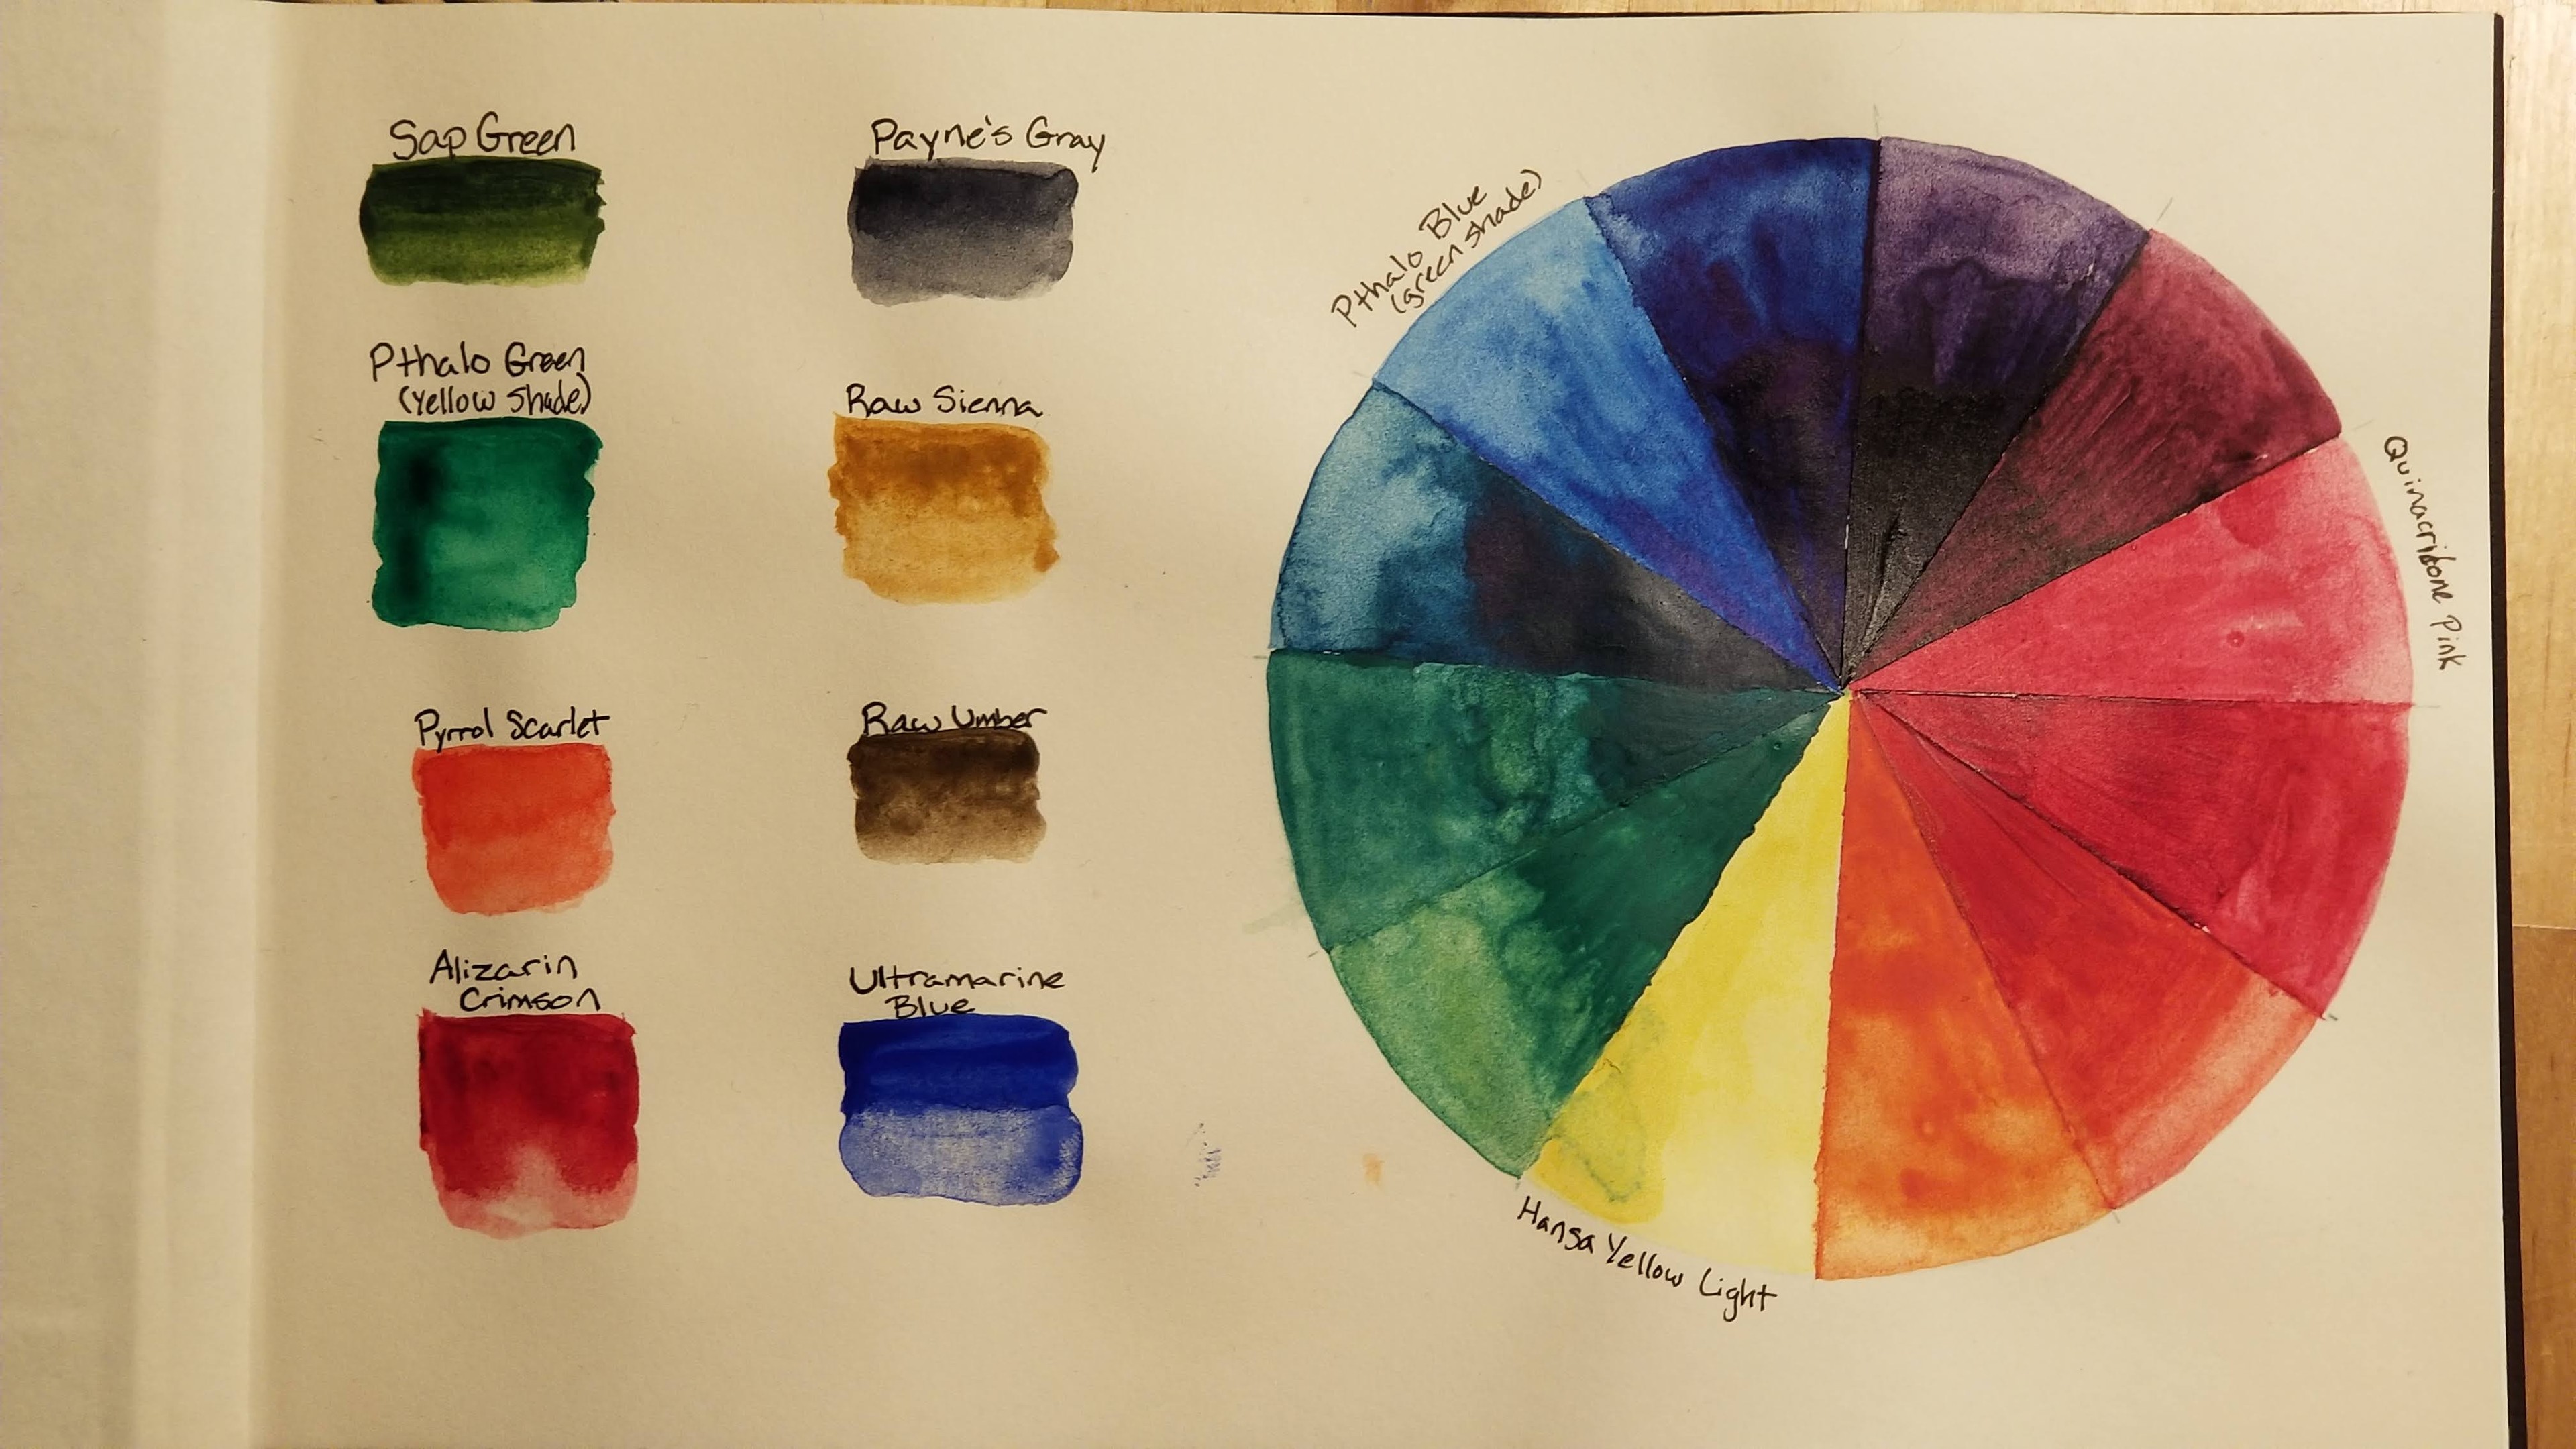  Watercolor color wheel using Pthalo Blue (green shade), Quinacridone Pink, & Hansa Yellow Light. Also watercolor swatches in sap & pthalo green, raw sienna & umber, Payne's gray, ultramarine blue, pyrrol scarlet, & alizarin crimson.